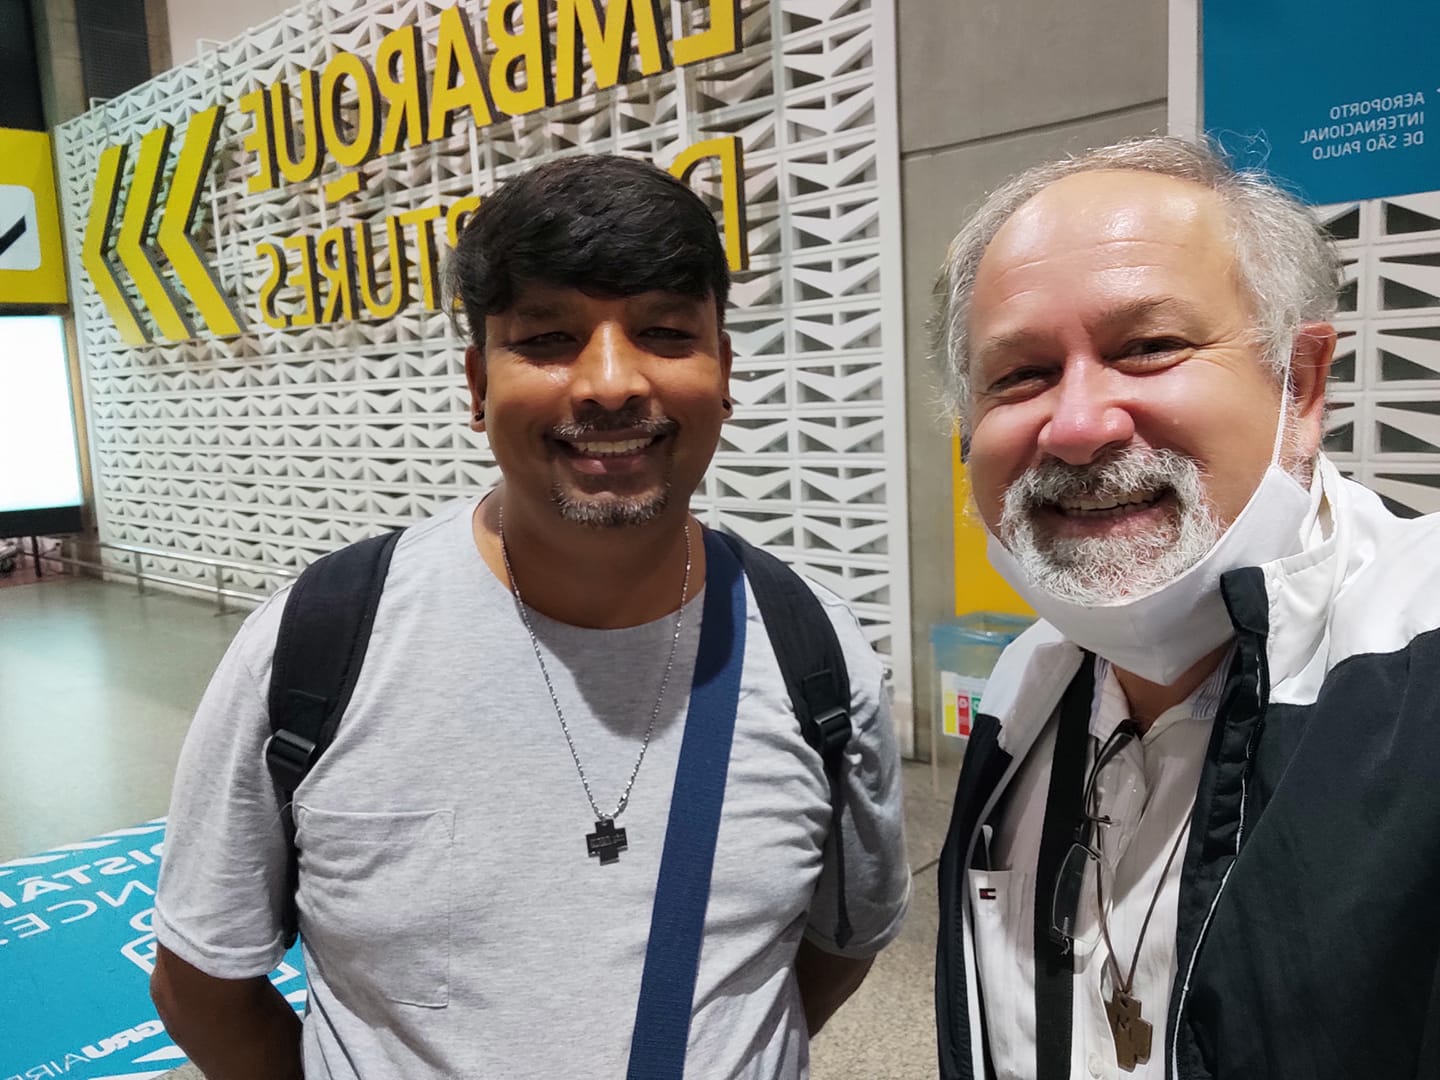 Meeting in a Brazilian Airport: Brothers João Batista, back in Brazil from East Timor, and Paul Samuel Bhatti, from Tabatinga to South Africa (LaValla200>). #MaristsOfChampagnat Journing Together as Global Family